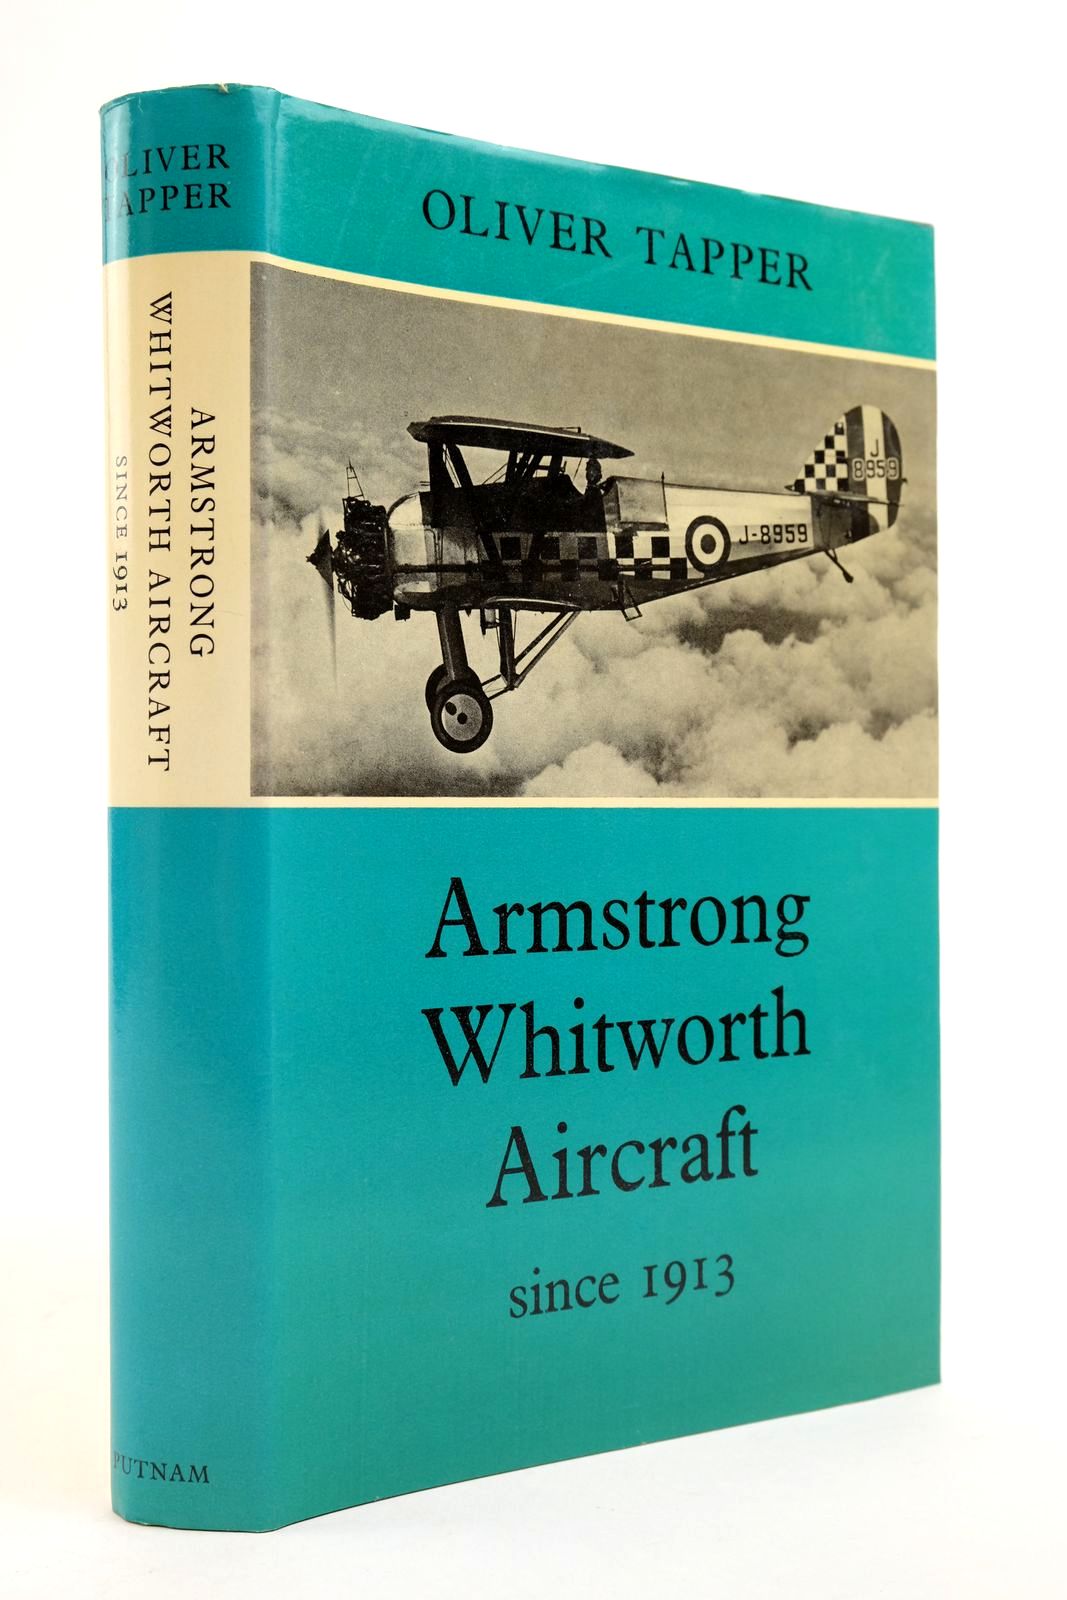 Photo of ARMSTRONG WHITWORTH AIRCRAFT SINCE 1913 written by Tapper, Oliver published by Putnam (STOCK CODE: 2139112)  for sale by Stella & Rose's Books